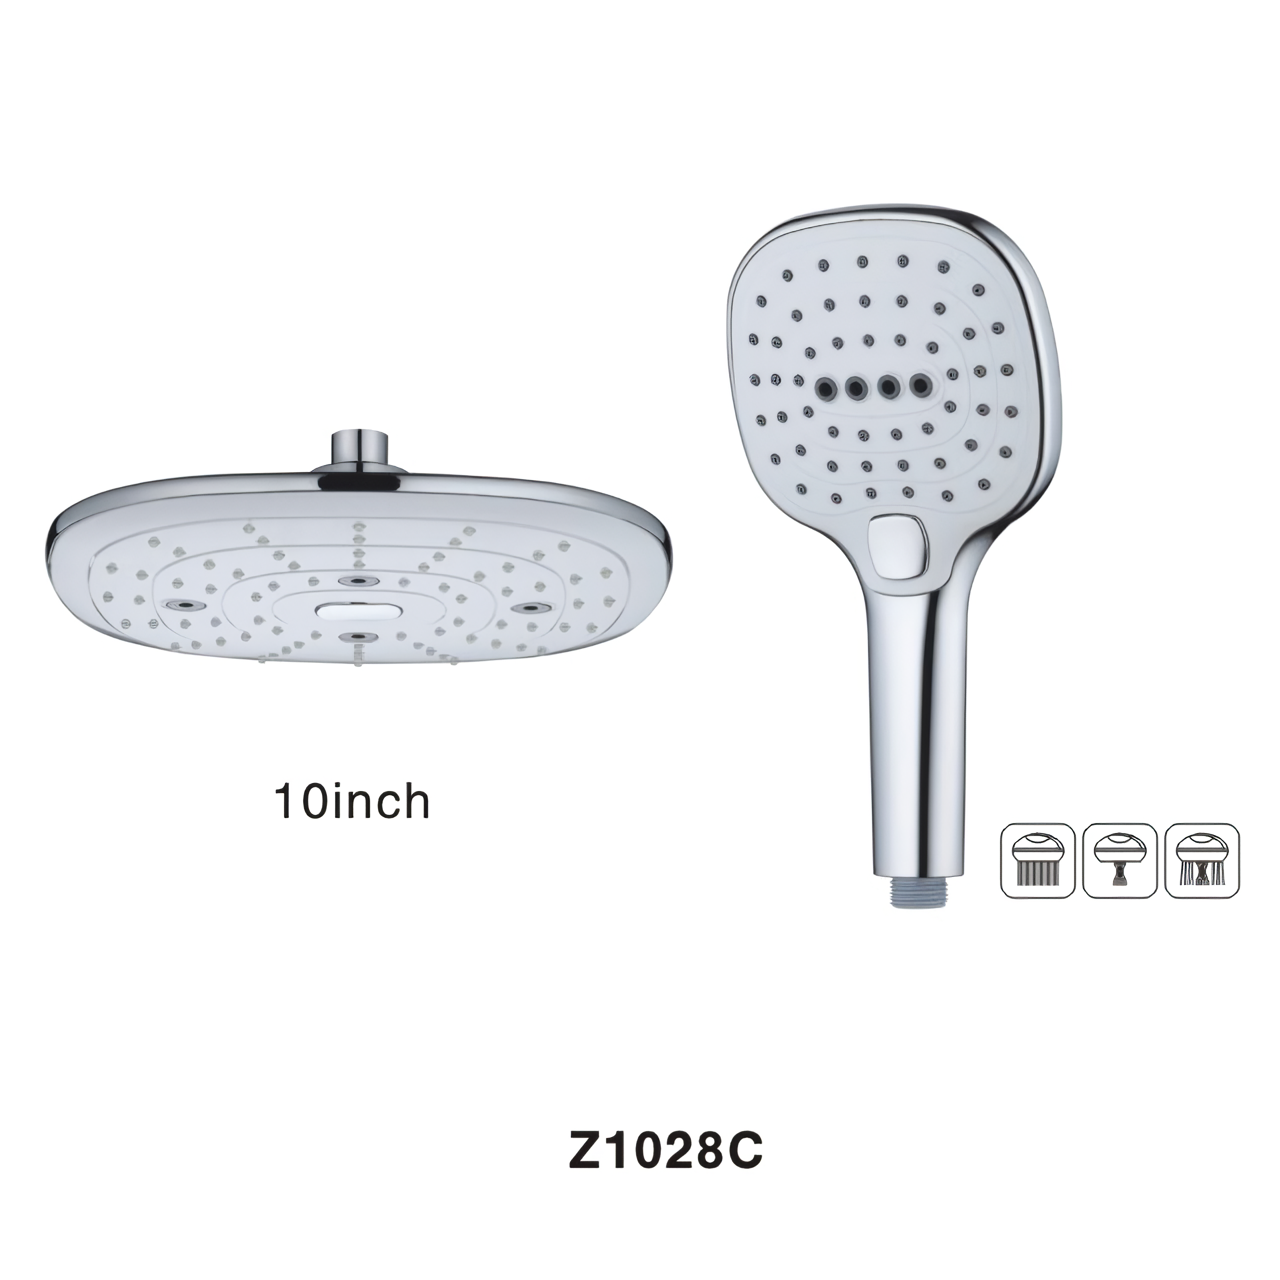 Z1028C Shower Heads with Handheld Spray Combo 10 Inch High Pressure Rain Plastic Shower Head 3 Settings Large Silver Panel Plastic Hand Shower